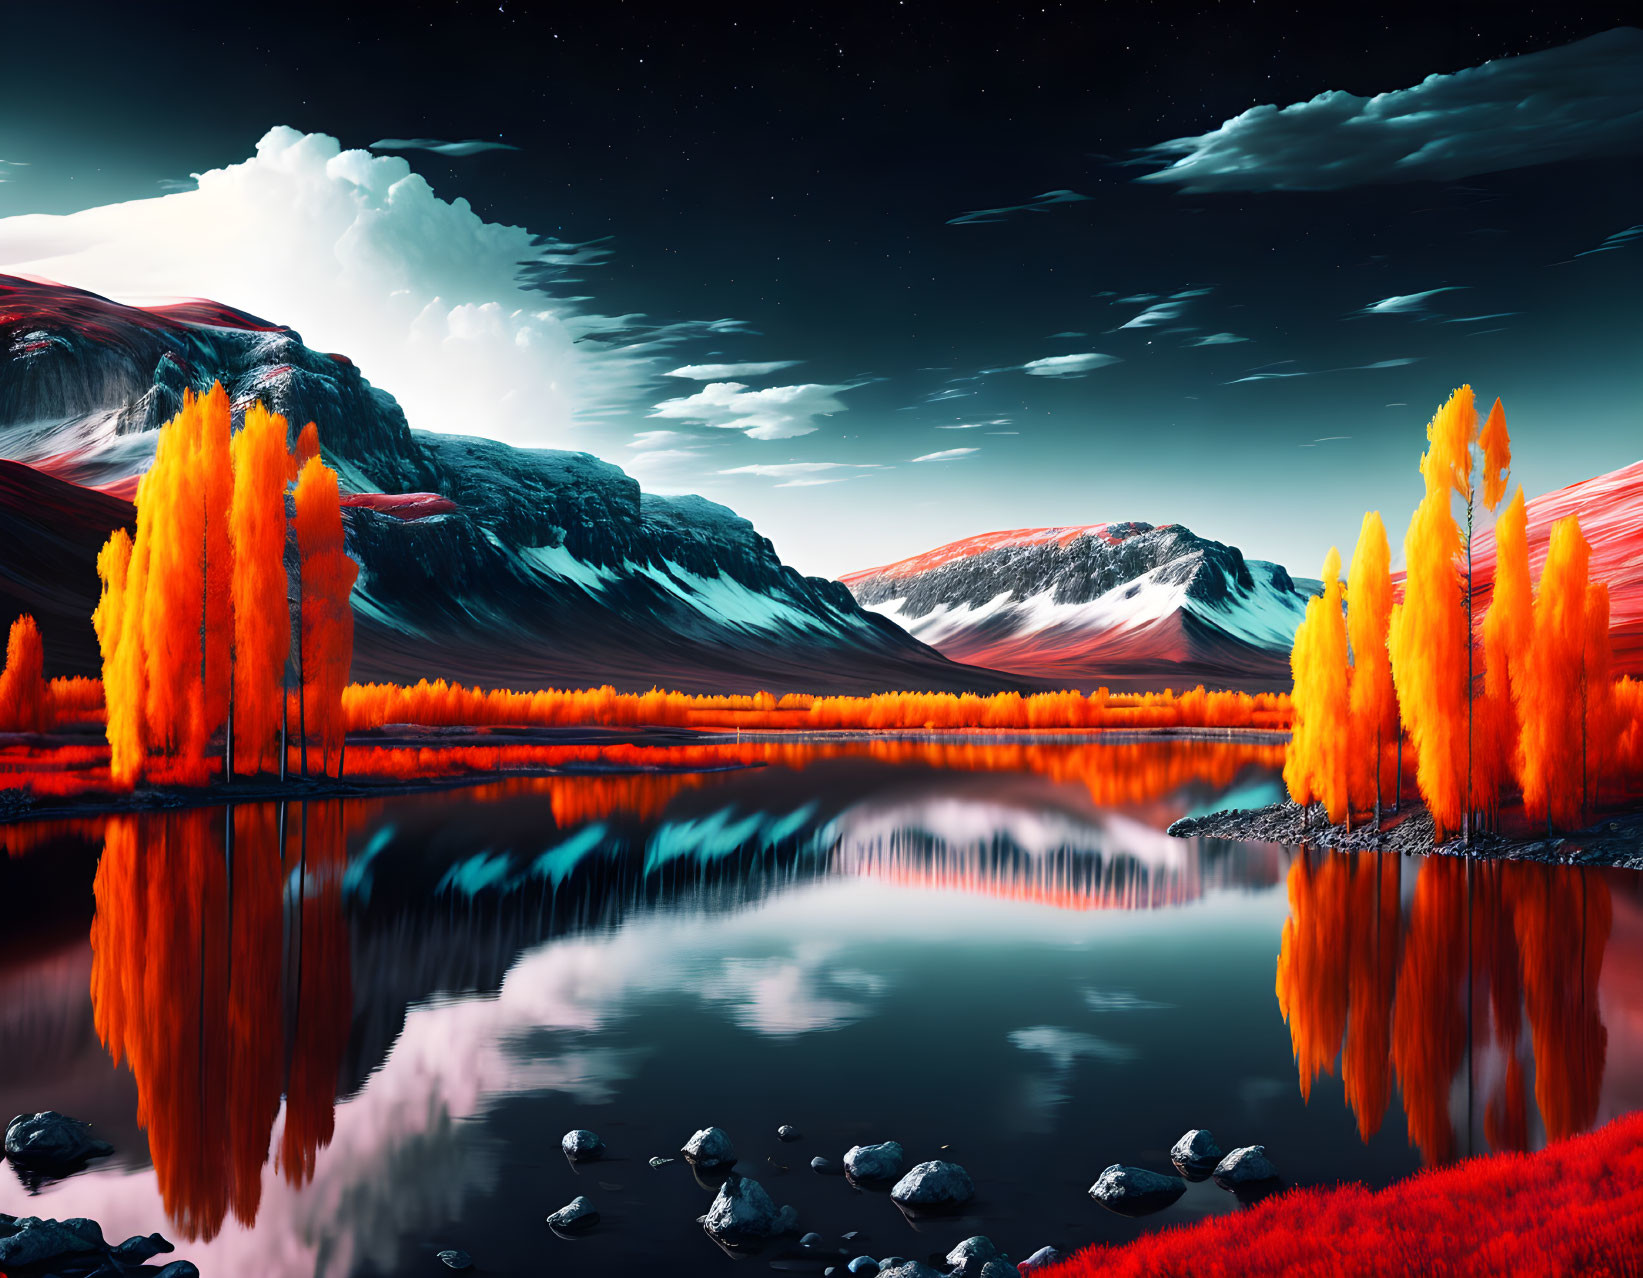 Autumn Trees Reflecting in Tranquil Lake with Snow-Capped Mountains